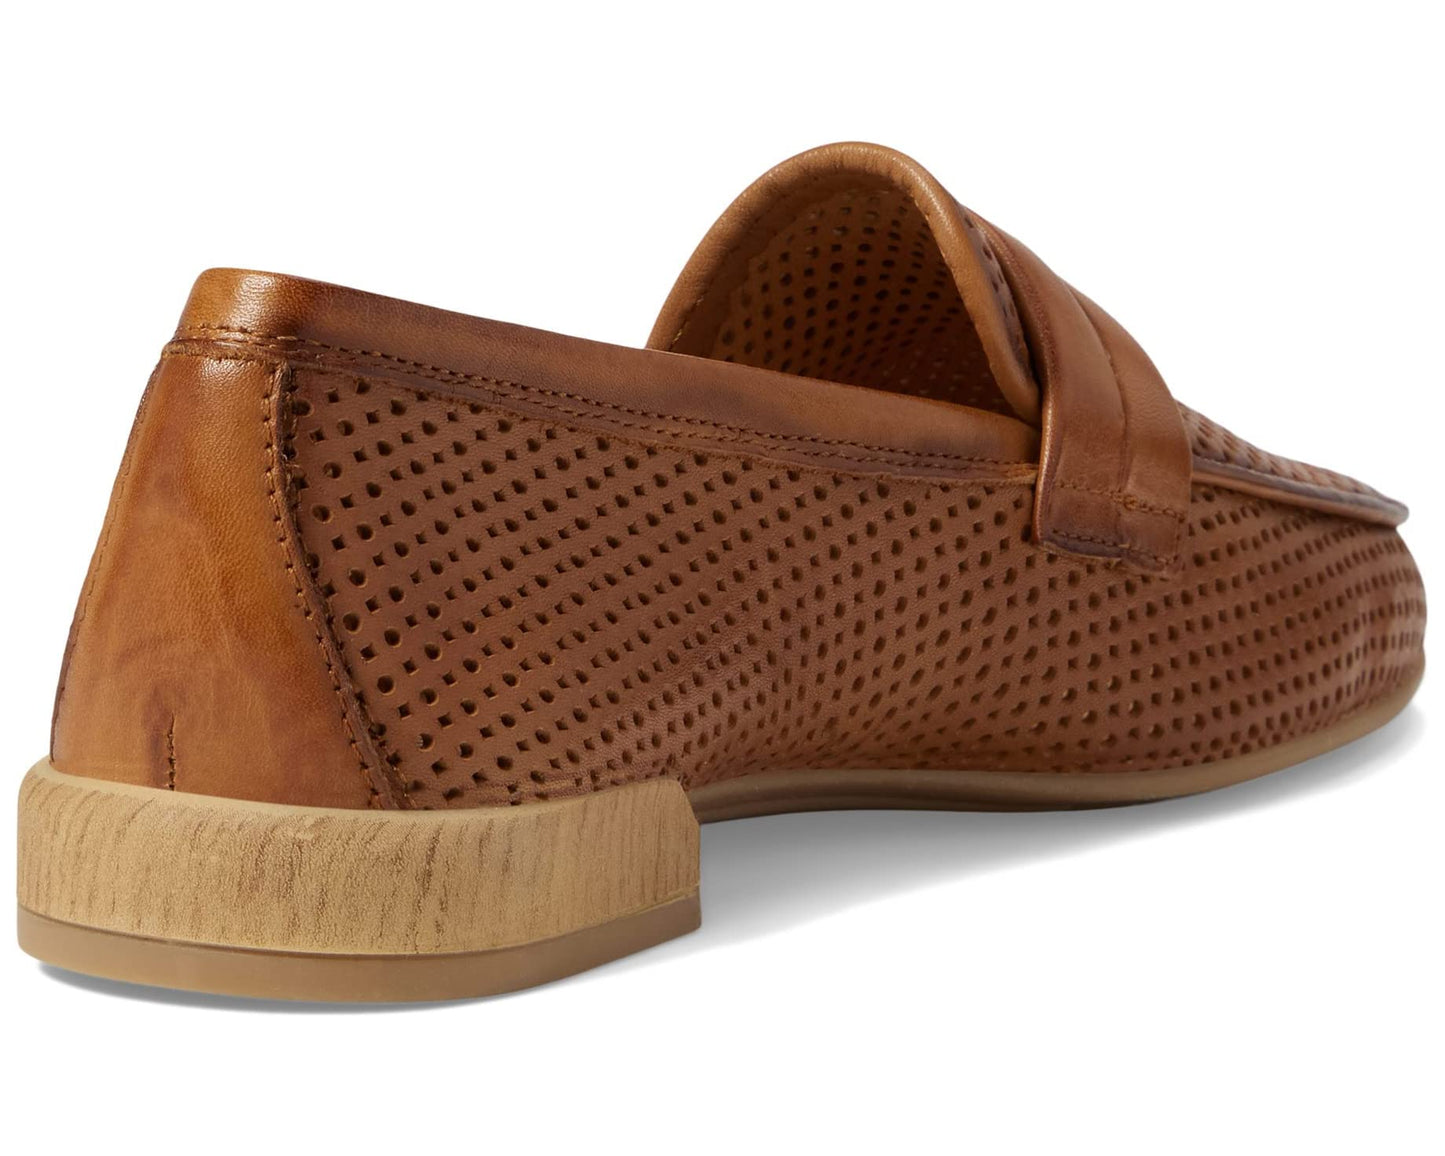 Almeria Perforated Leather Loafers